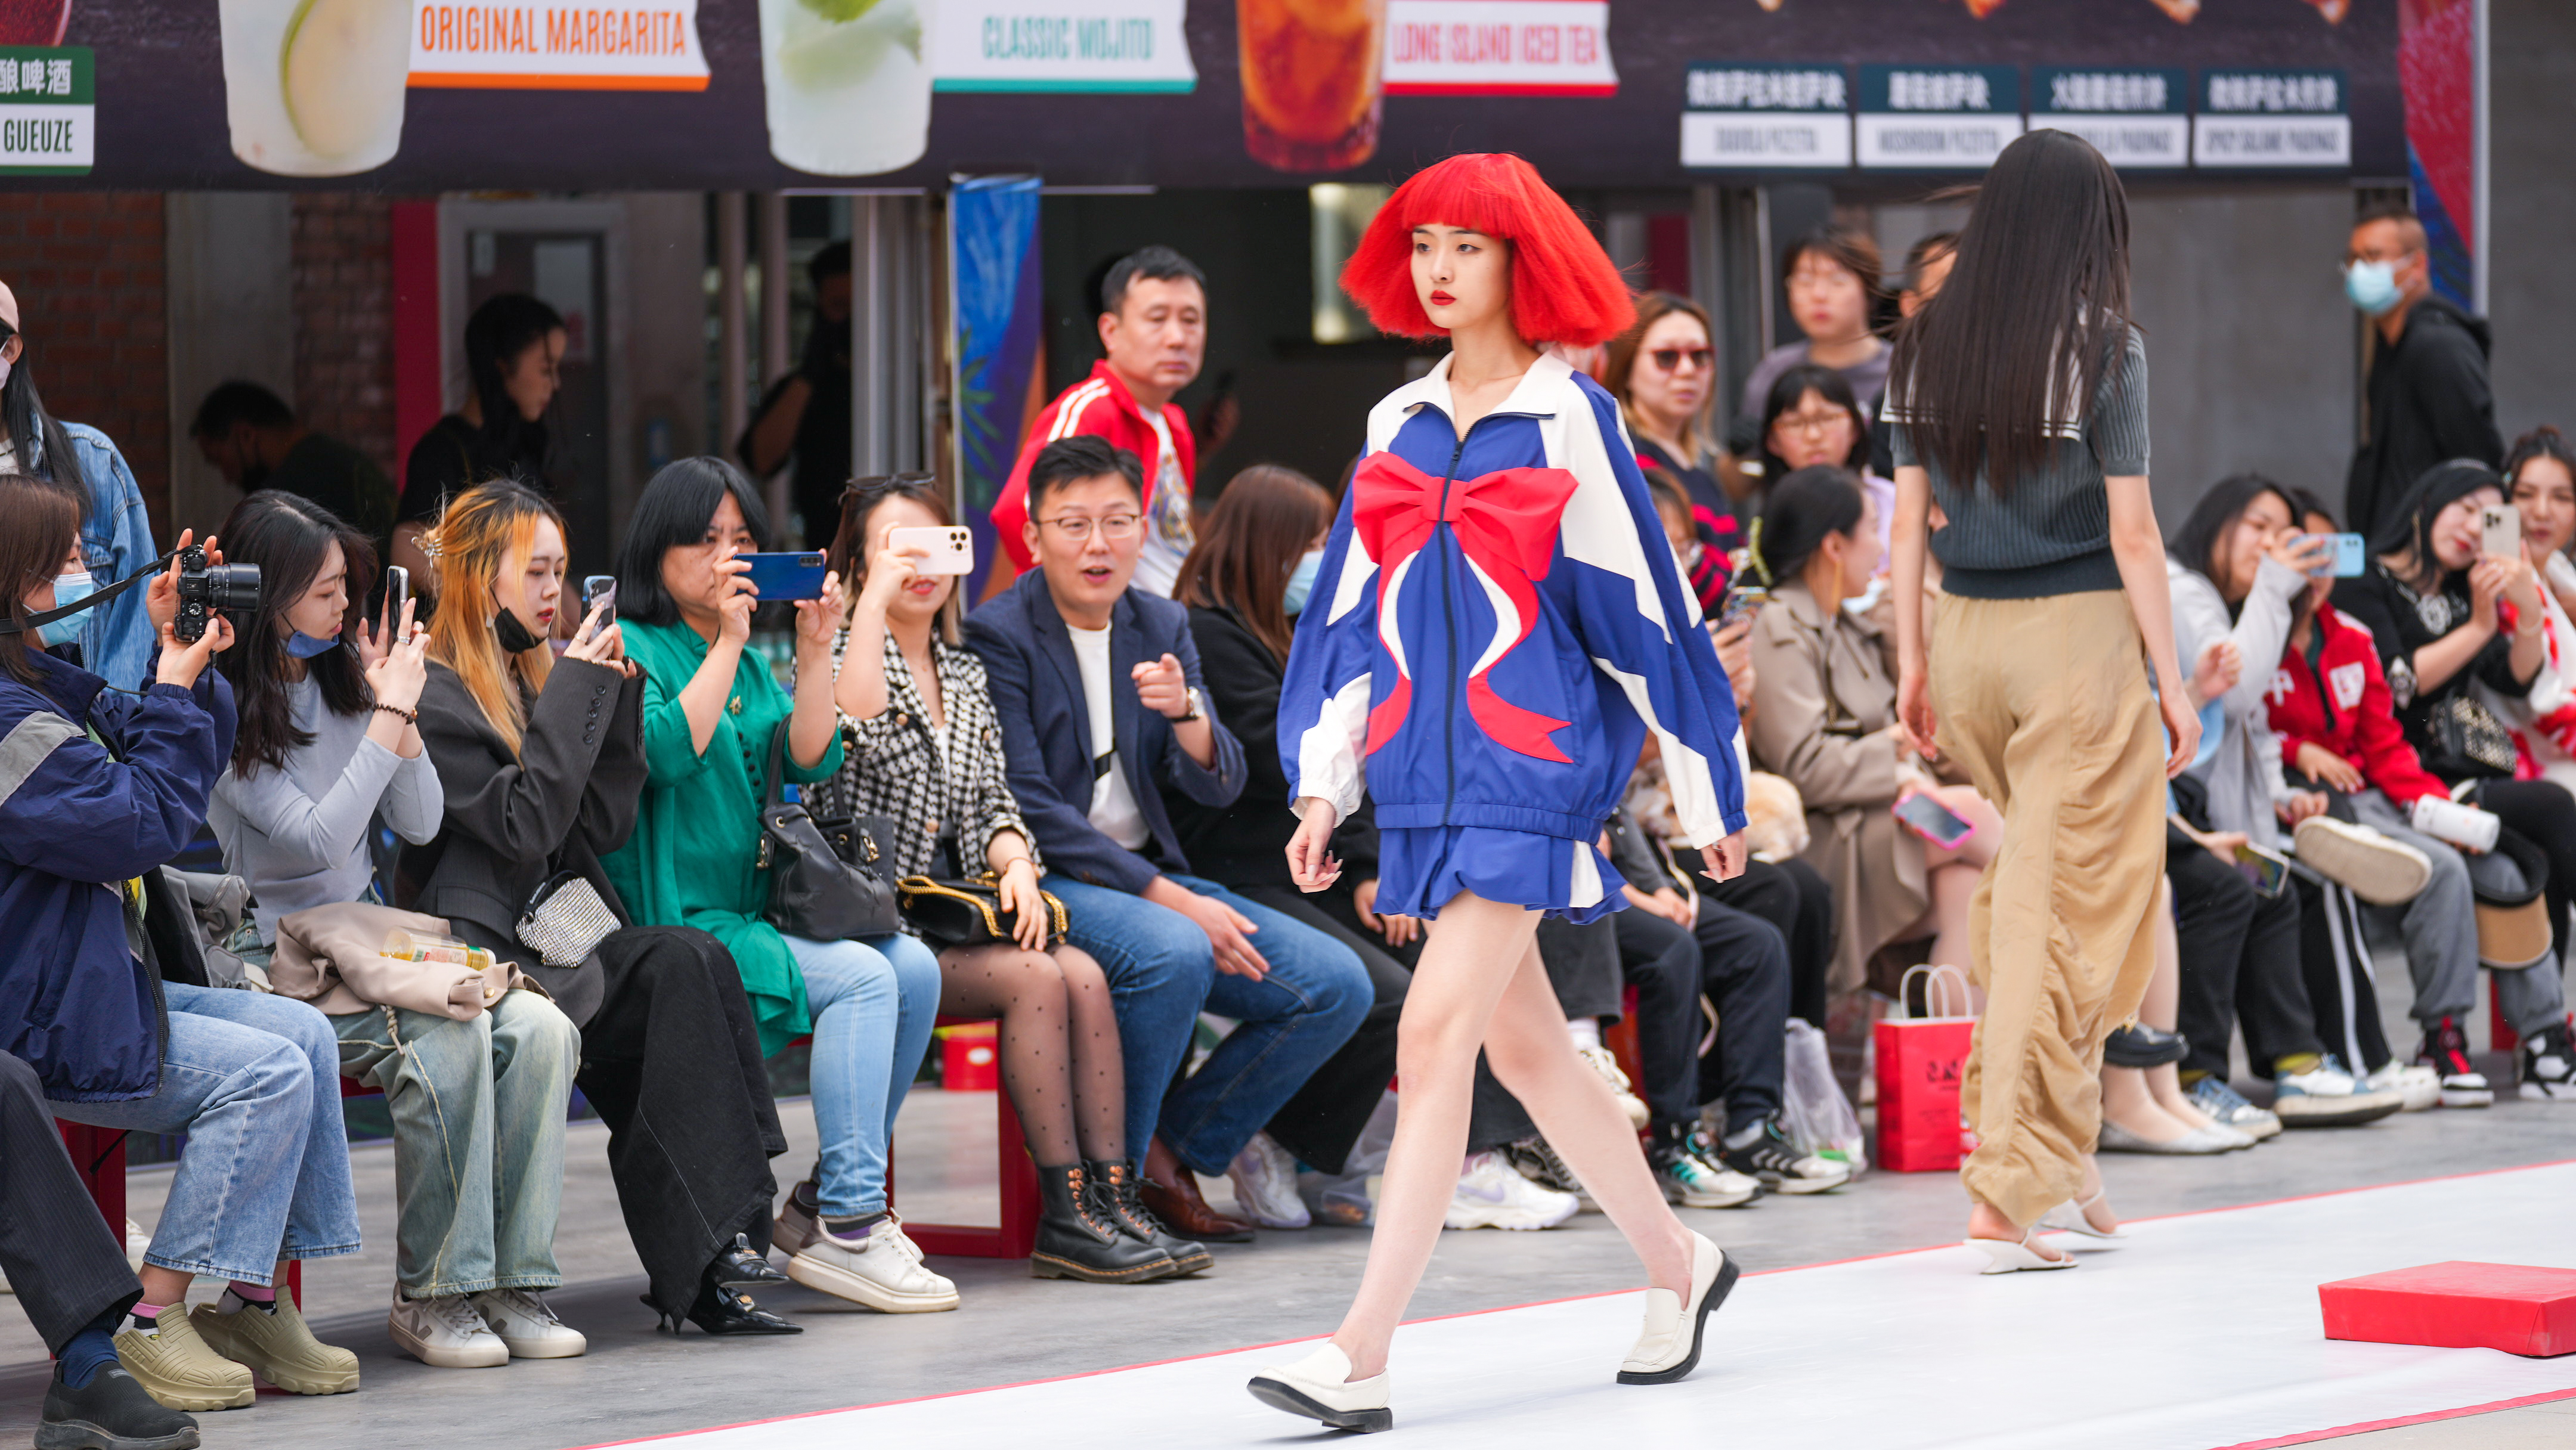 People in Beijing participate in fashion activities during Labor Day holiday